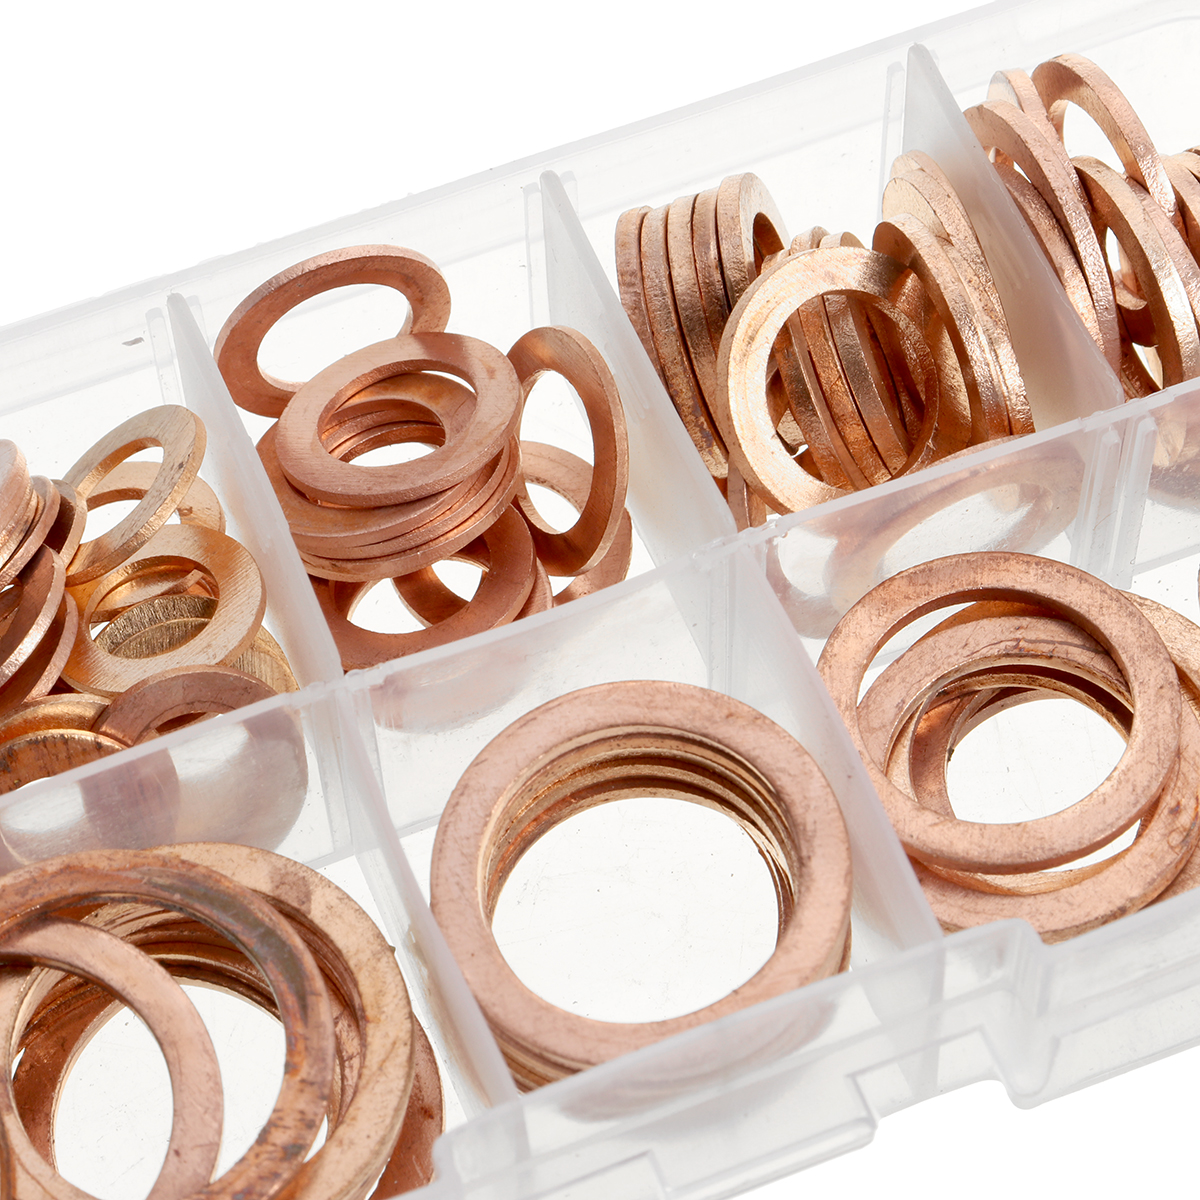 100Pcs-Assorted-Copper-Sealing-Solid-Gasket-Washer-Sump-Plug-Oil-For-Boat-Crush-Flat-Seal-Ring-Tool--1809755-6